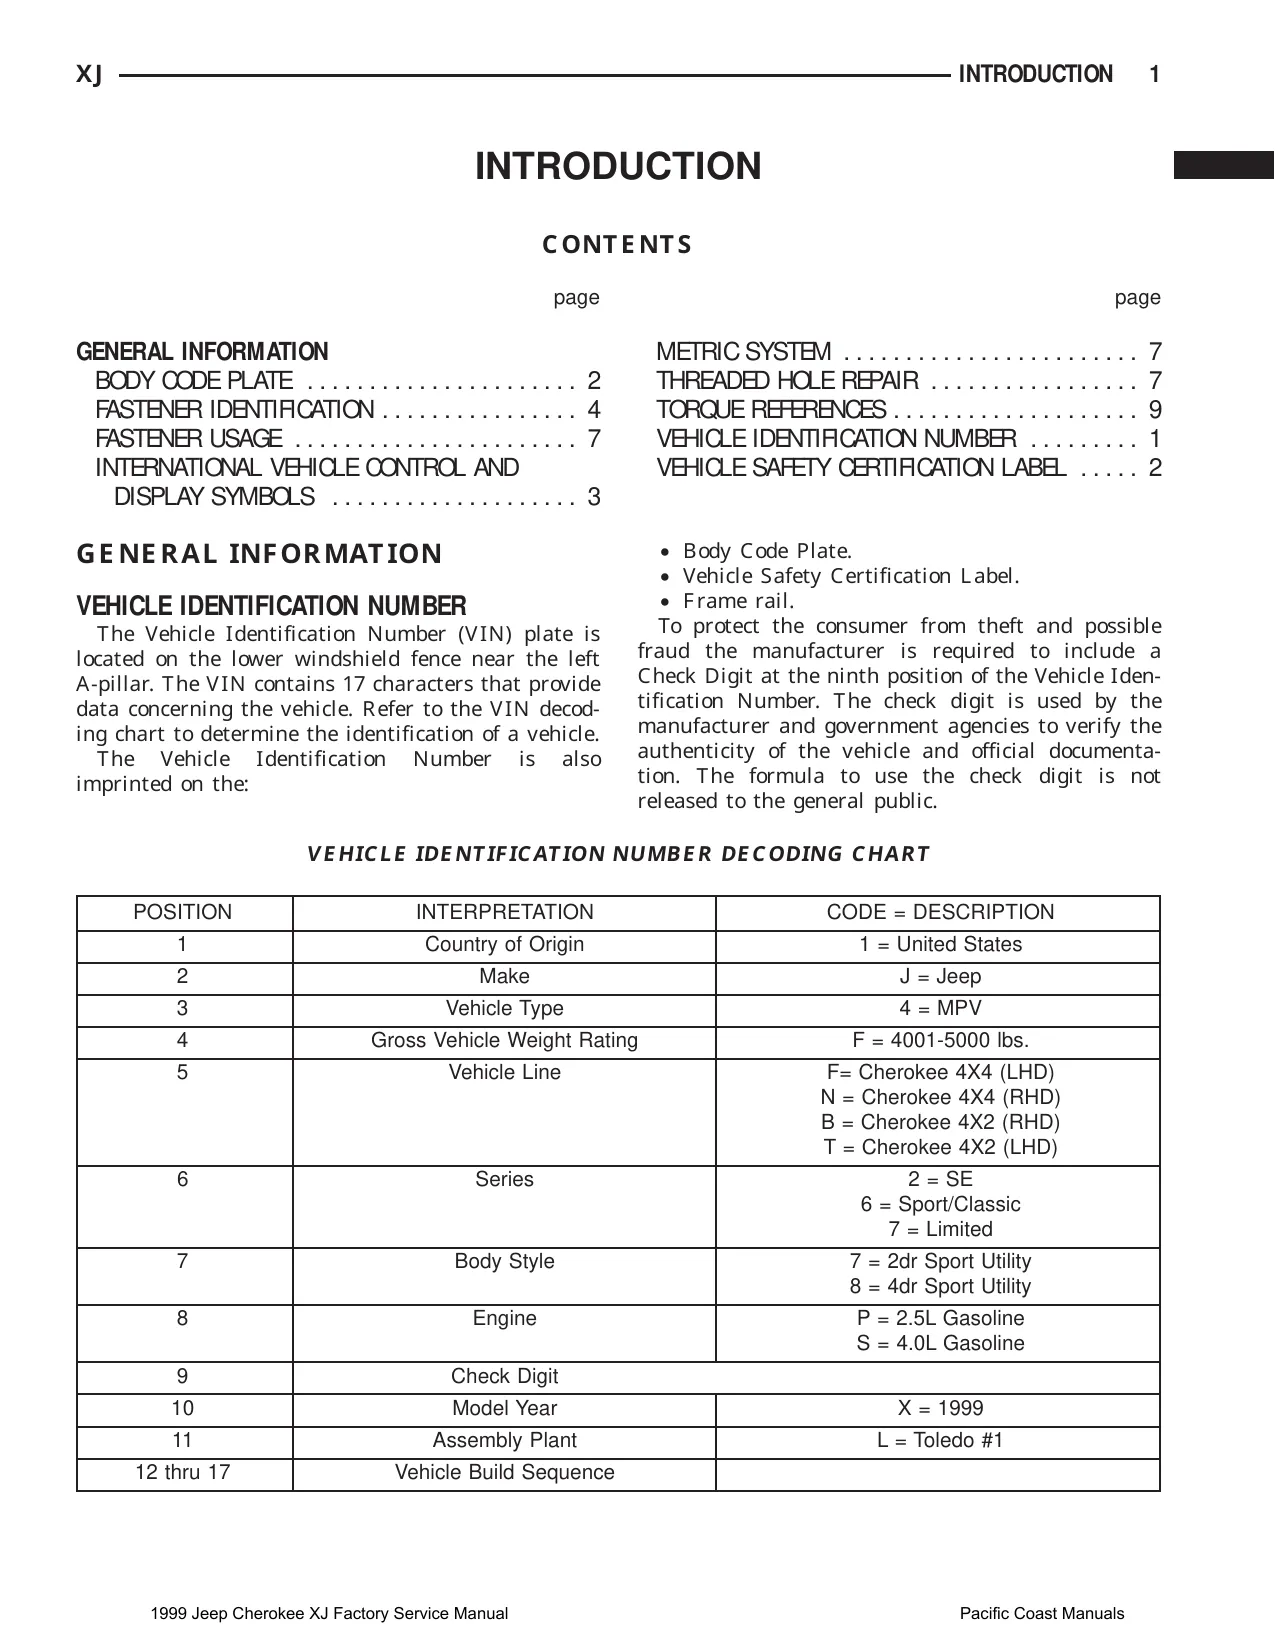 1999 Jeep Cherokee XJ, SE, Sport, Classic, and Limited Series, 2.5L, 4.0L factory service manual Preview image 3